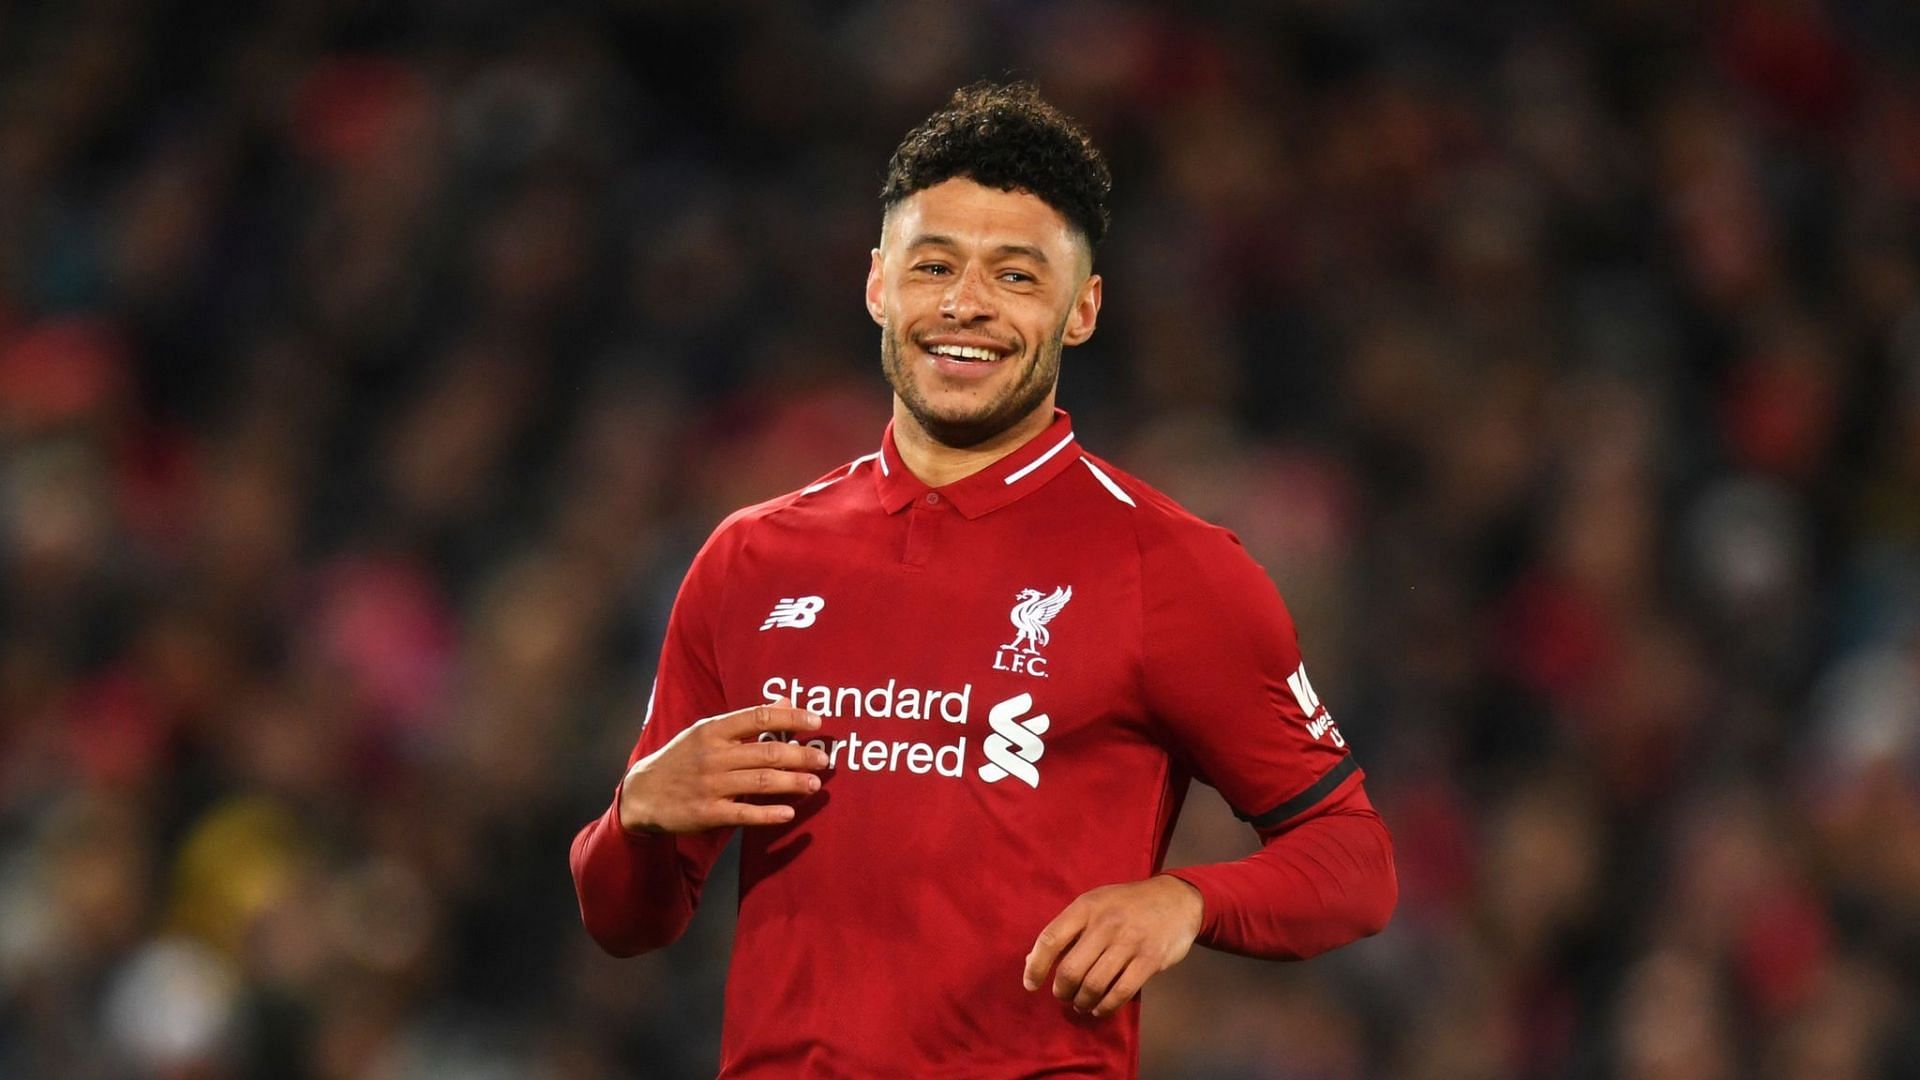 Alex Oxlade-Chamberlain in action for Liverpool (cred: Sky Sports)